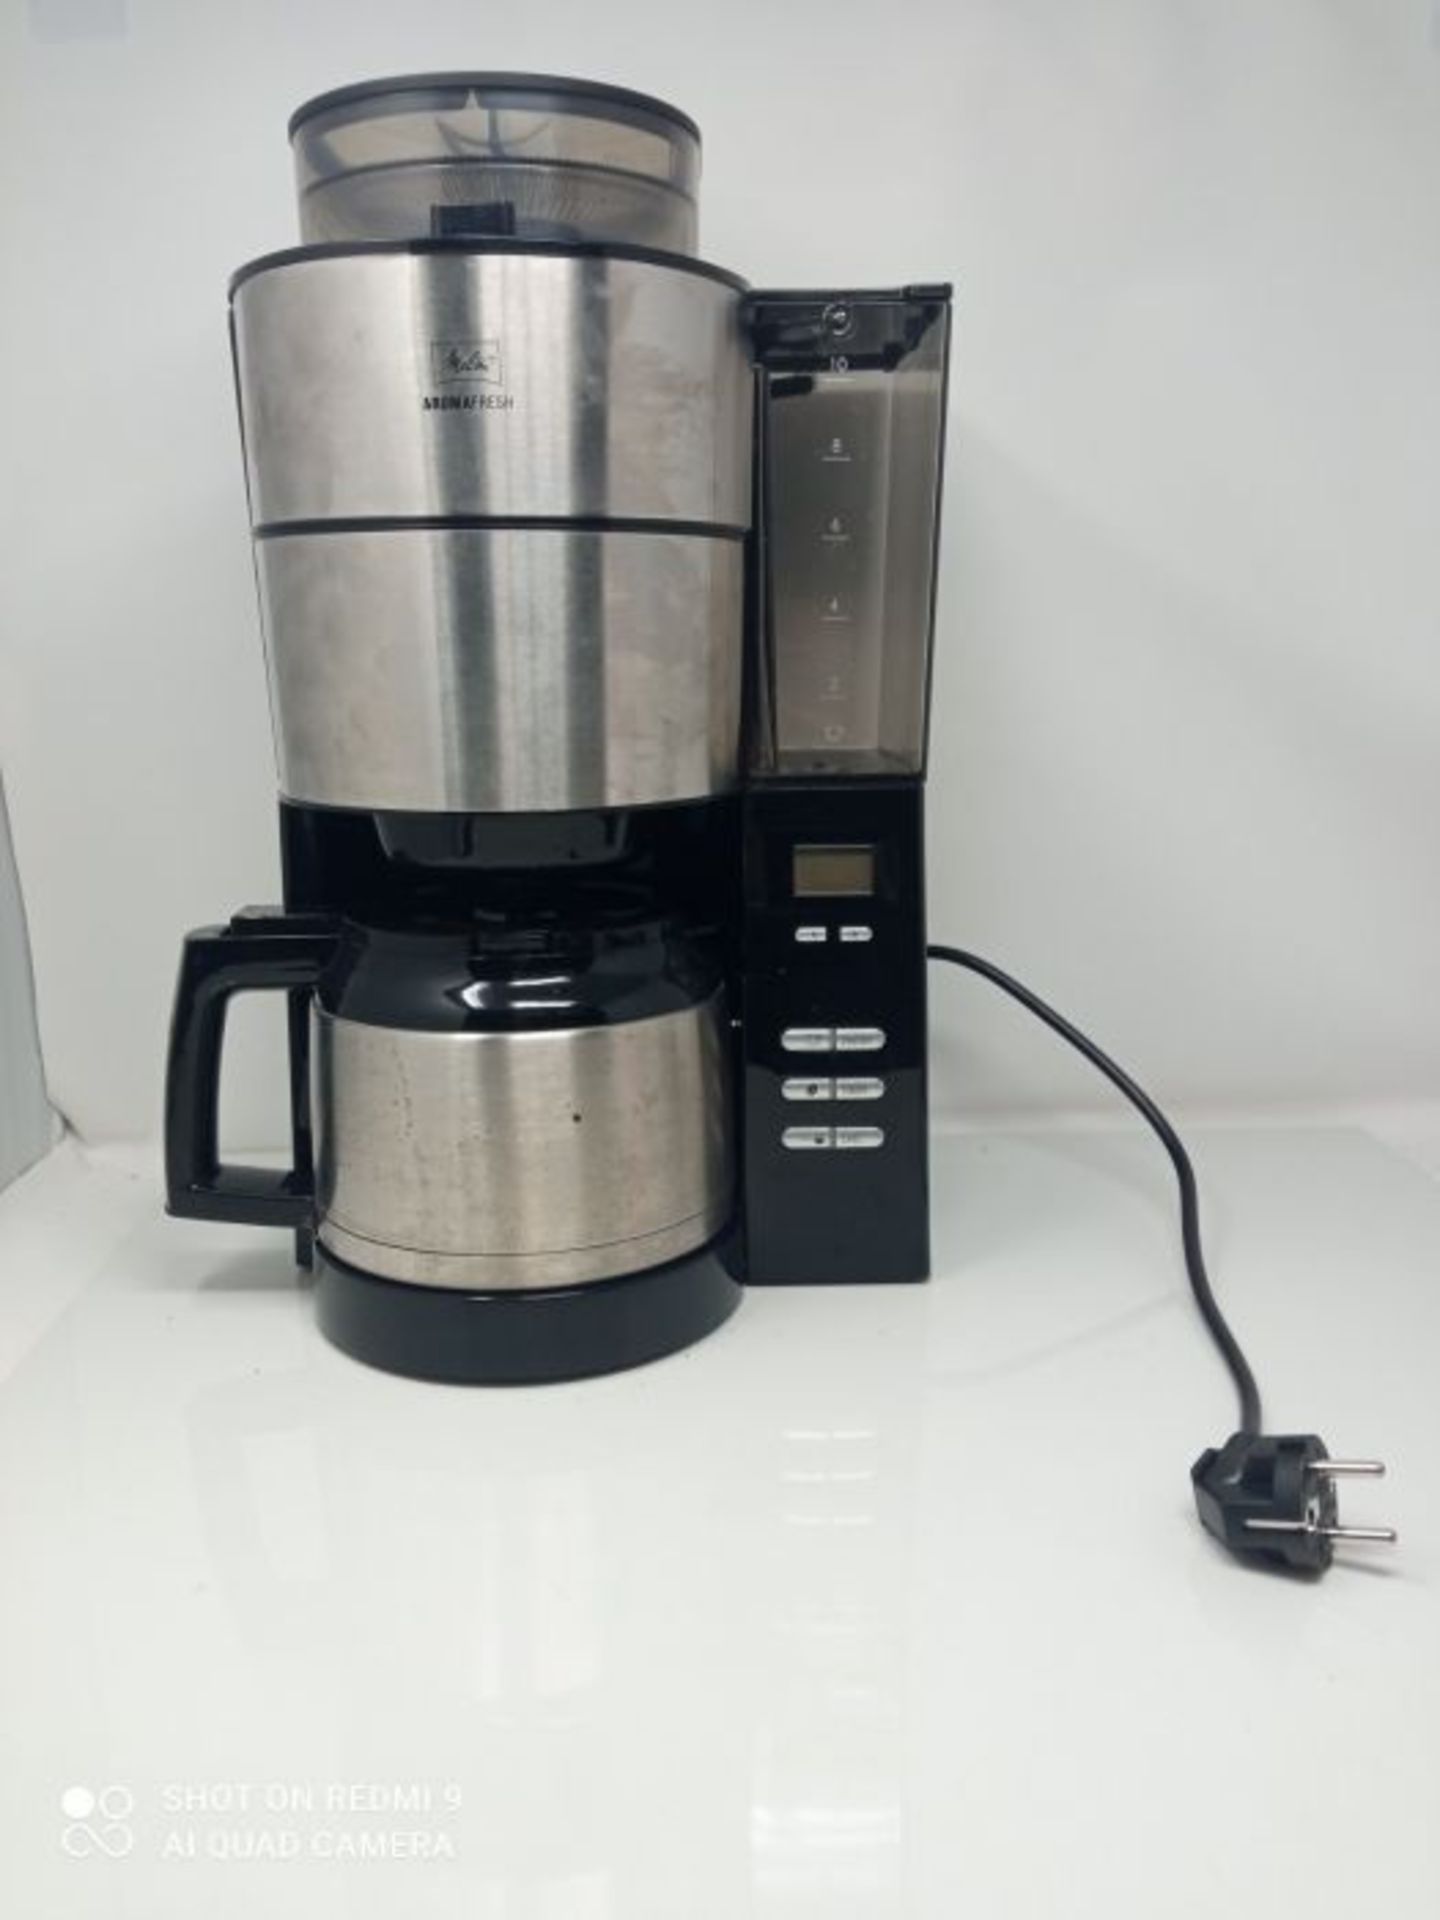 RRP £215.00 Melitta Filter Coffee Machine with Stainless Steel Jug, AROMAFRESH GRIND & BREW 1021-1 - Image 3 of 3